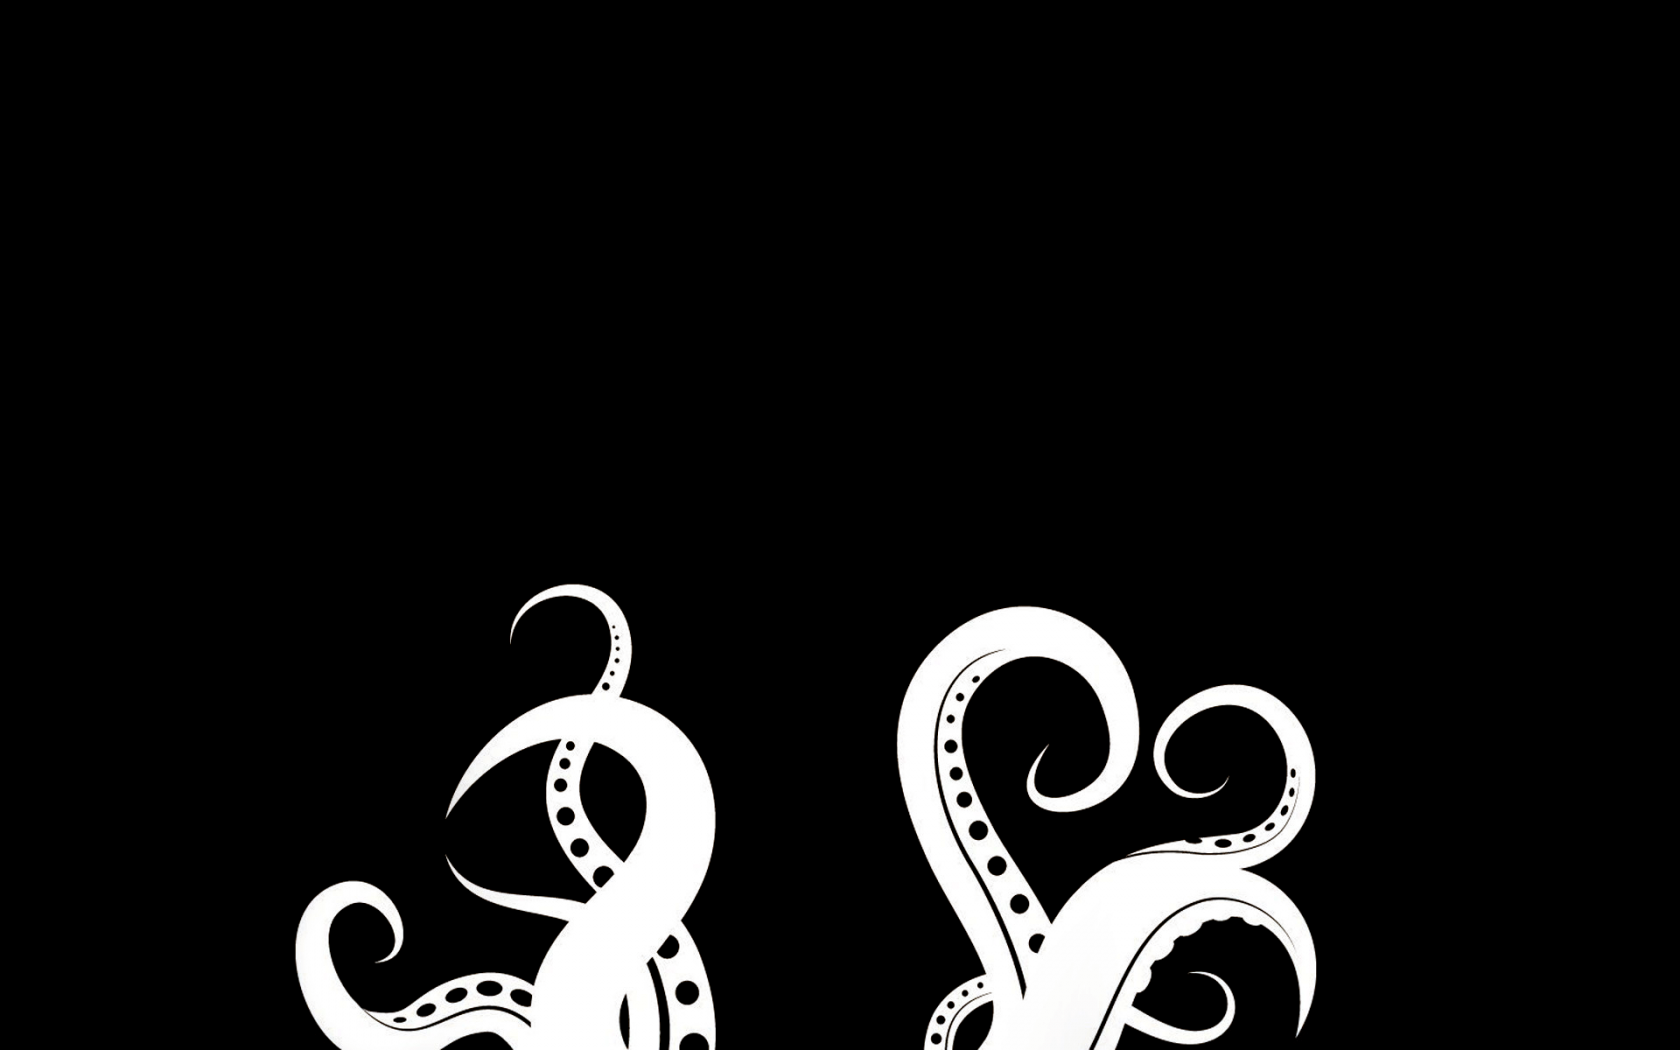 Cool Black And White Artwork Wallpaper Of Octopus Tentacles